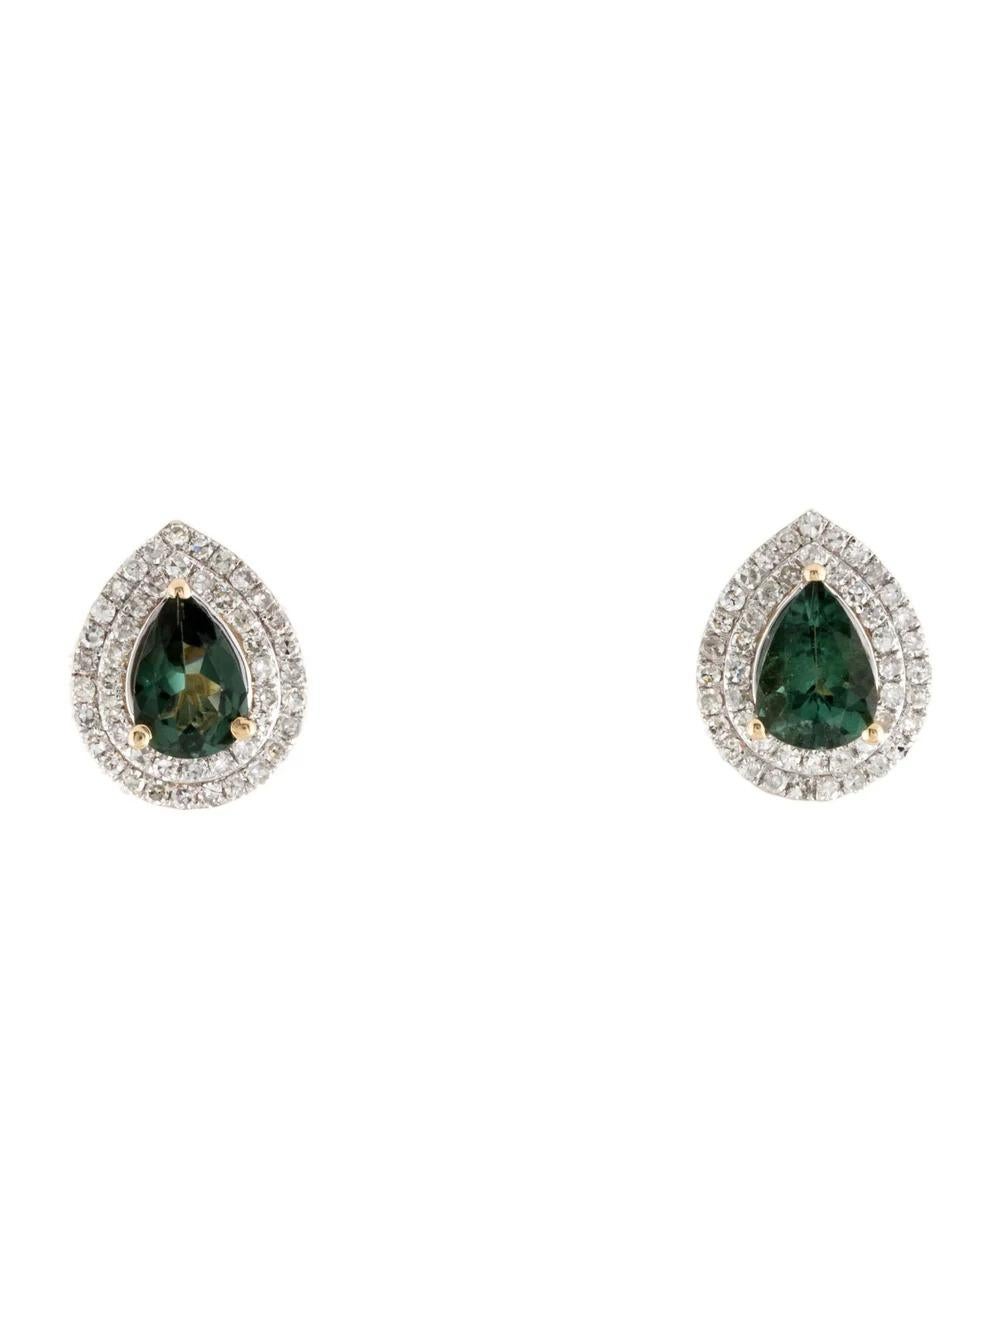 Elevate your elegance with these stunning Rhodium-Plated & 14K Yellow Gold Stud Earrings, featuring a captivating 1.1 Carat Faceted Pear Shaped Tourmaline and 0.47 Carats of shimmering Diamonds.

Specifications:

* Metal Type: 14K Yellow Gold,